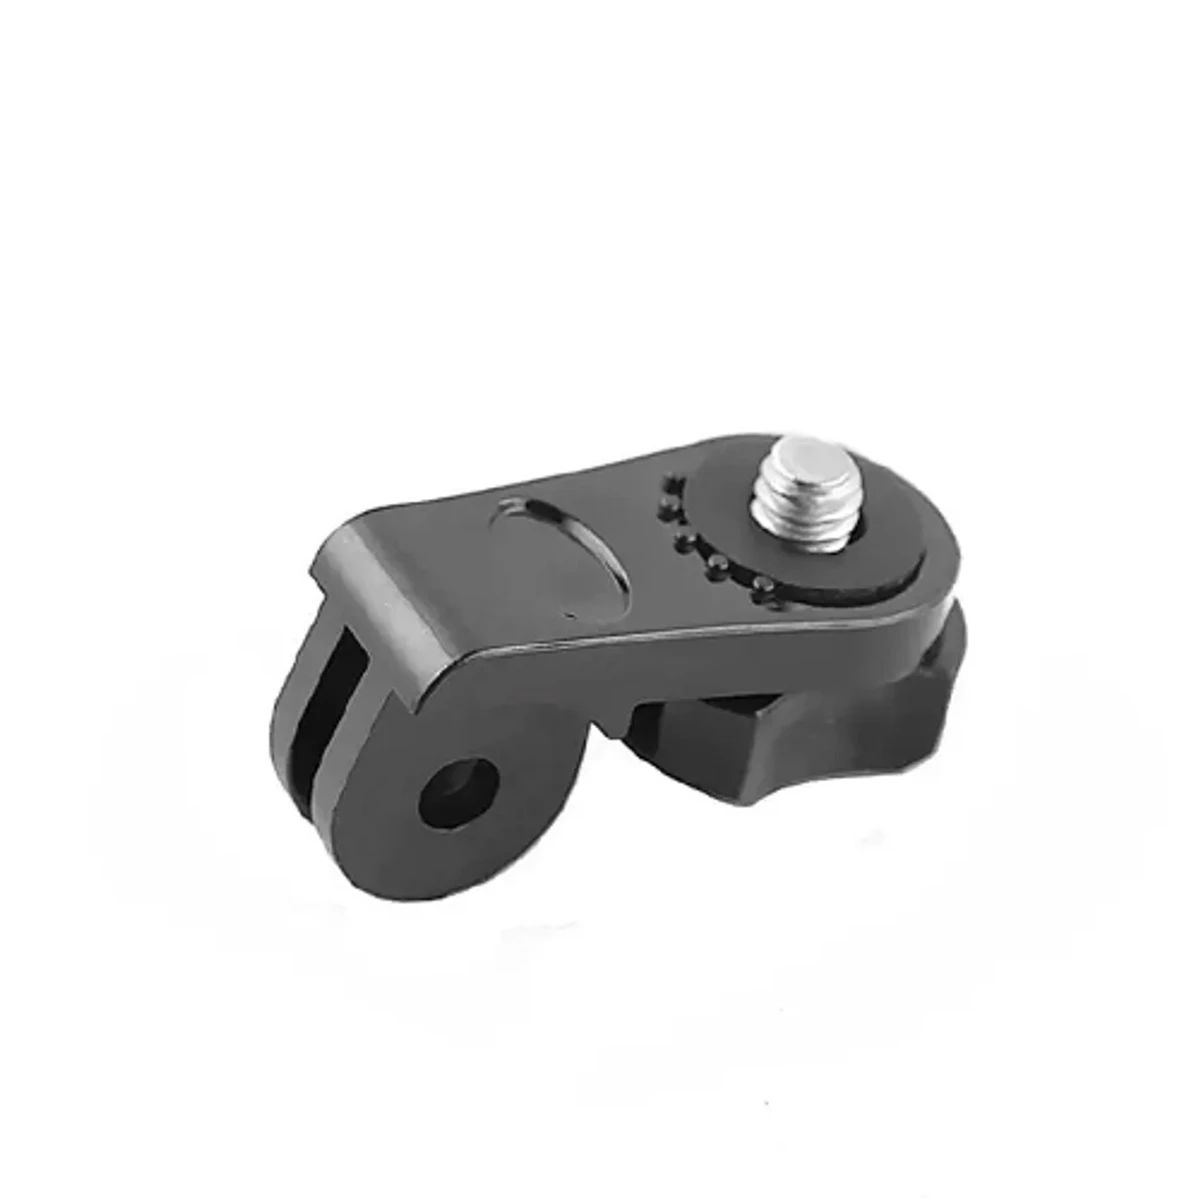 Tripod Screw Mount For Action Camera